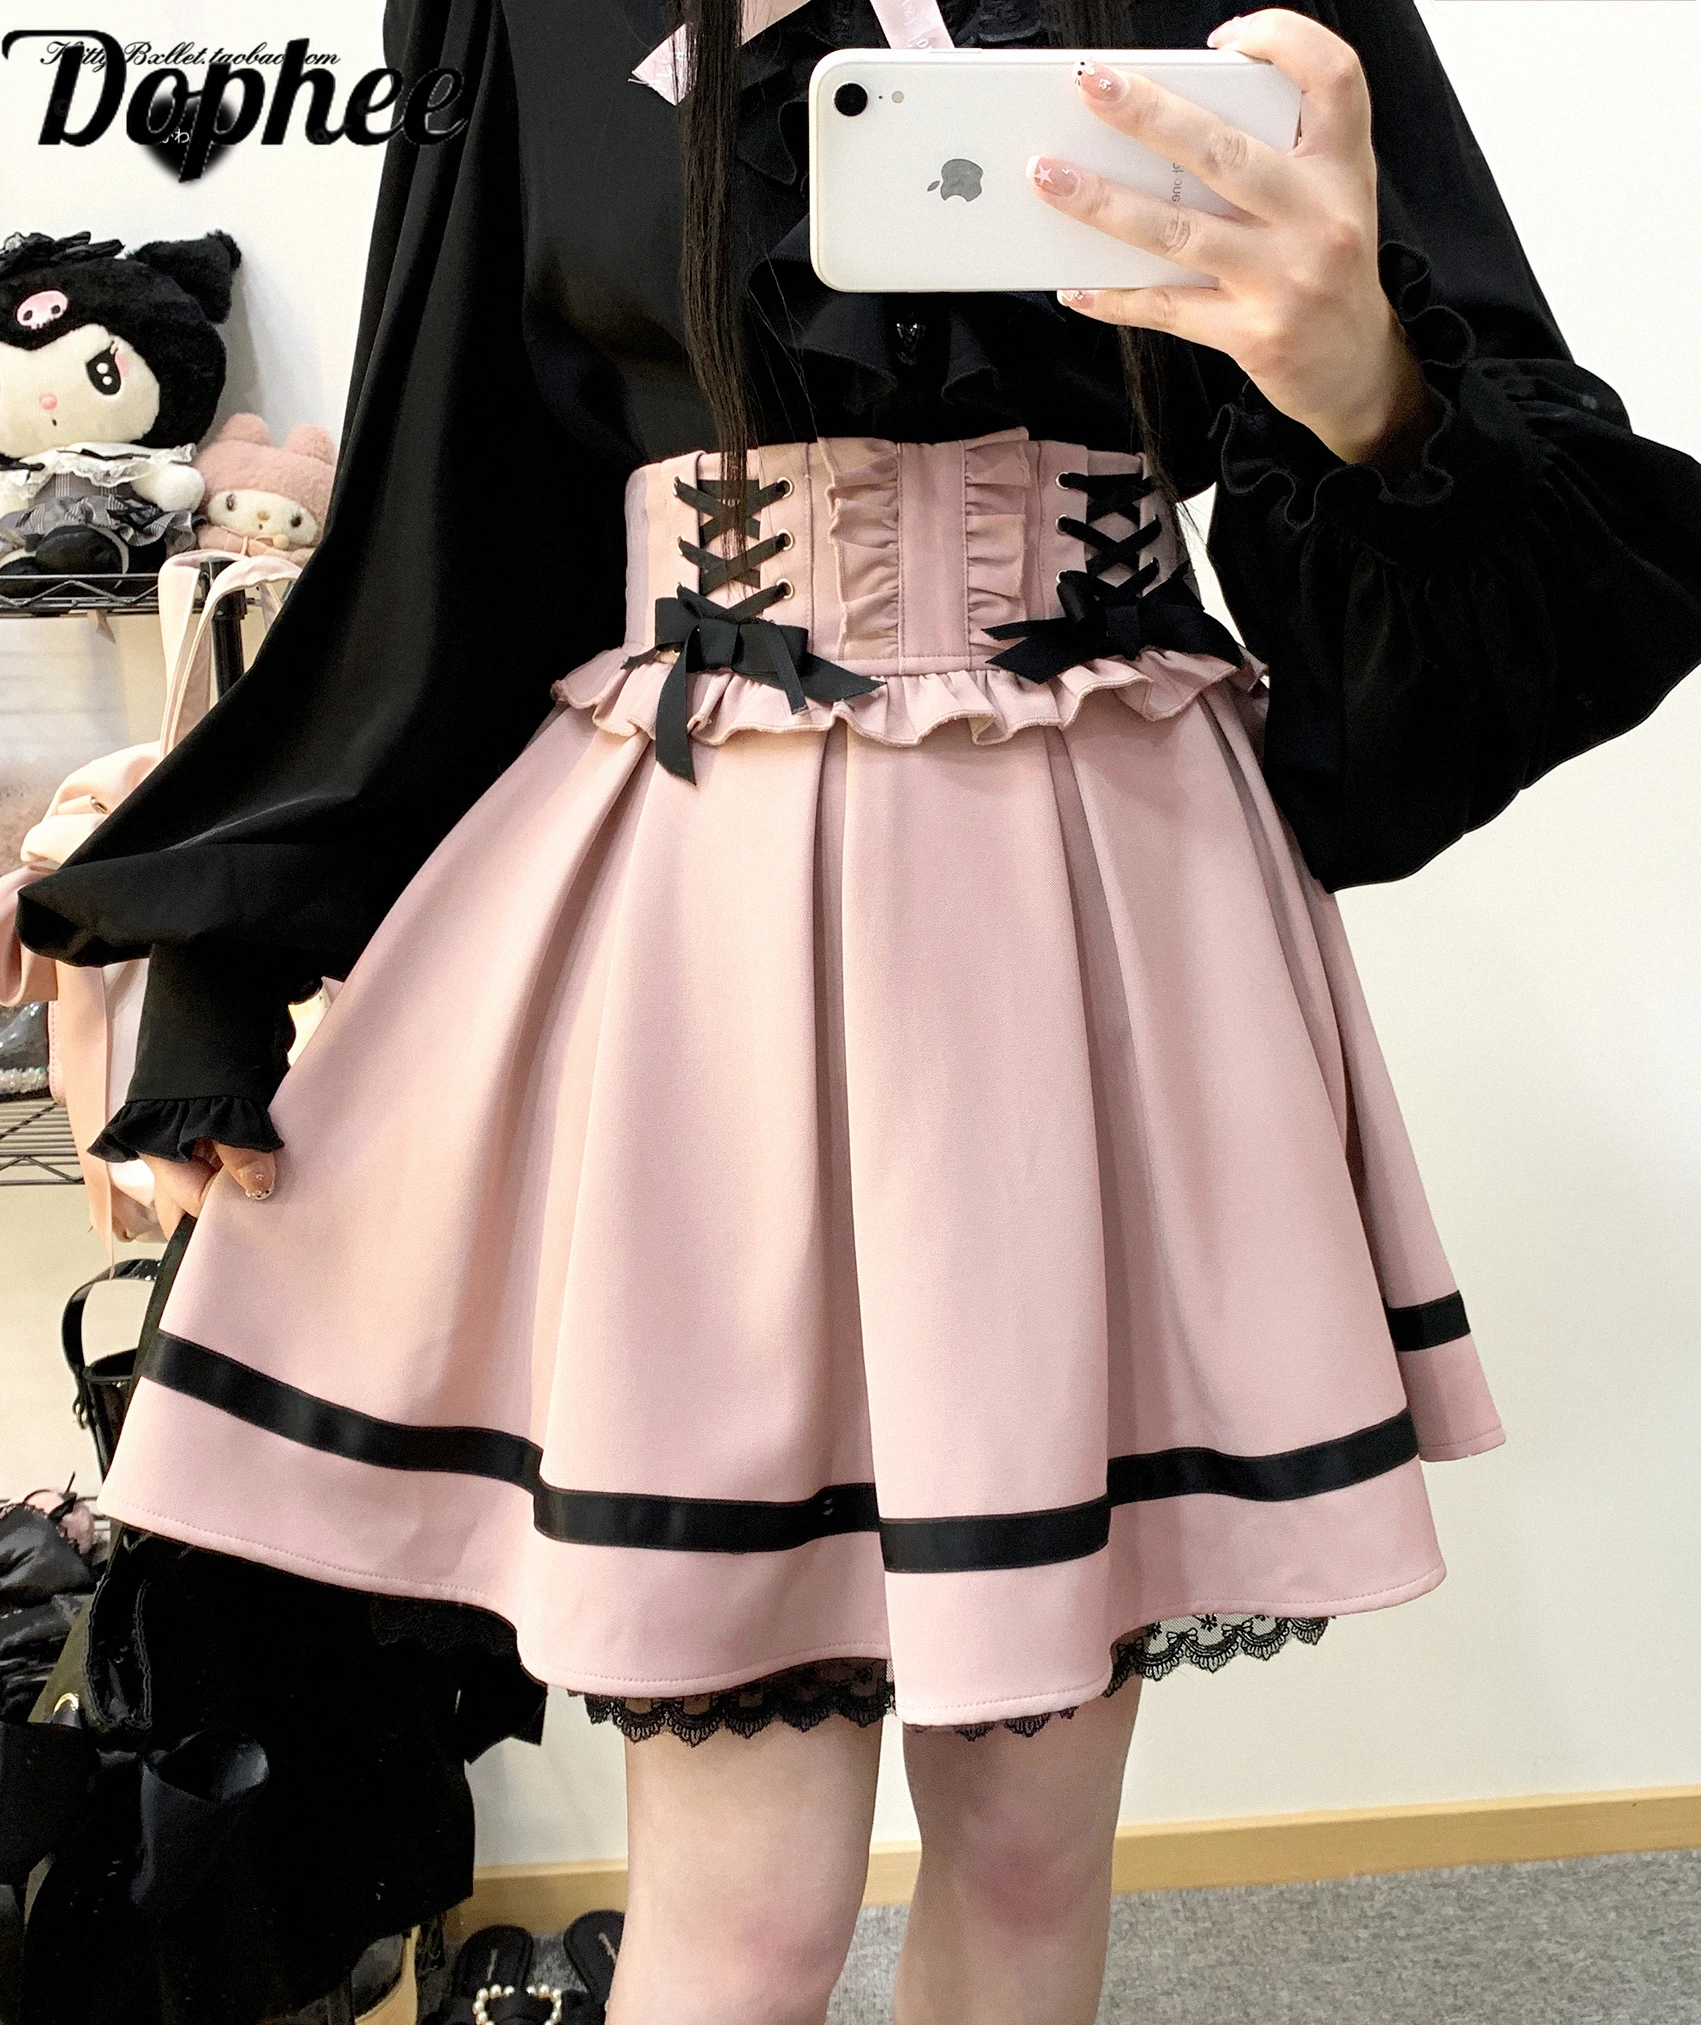 

Dophee Original Landmine System Young Girls Short Skirts Cute Double Layered Tie Bow Lace Splicing High Waist Lolita Skirts